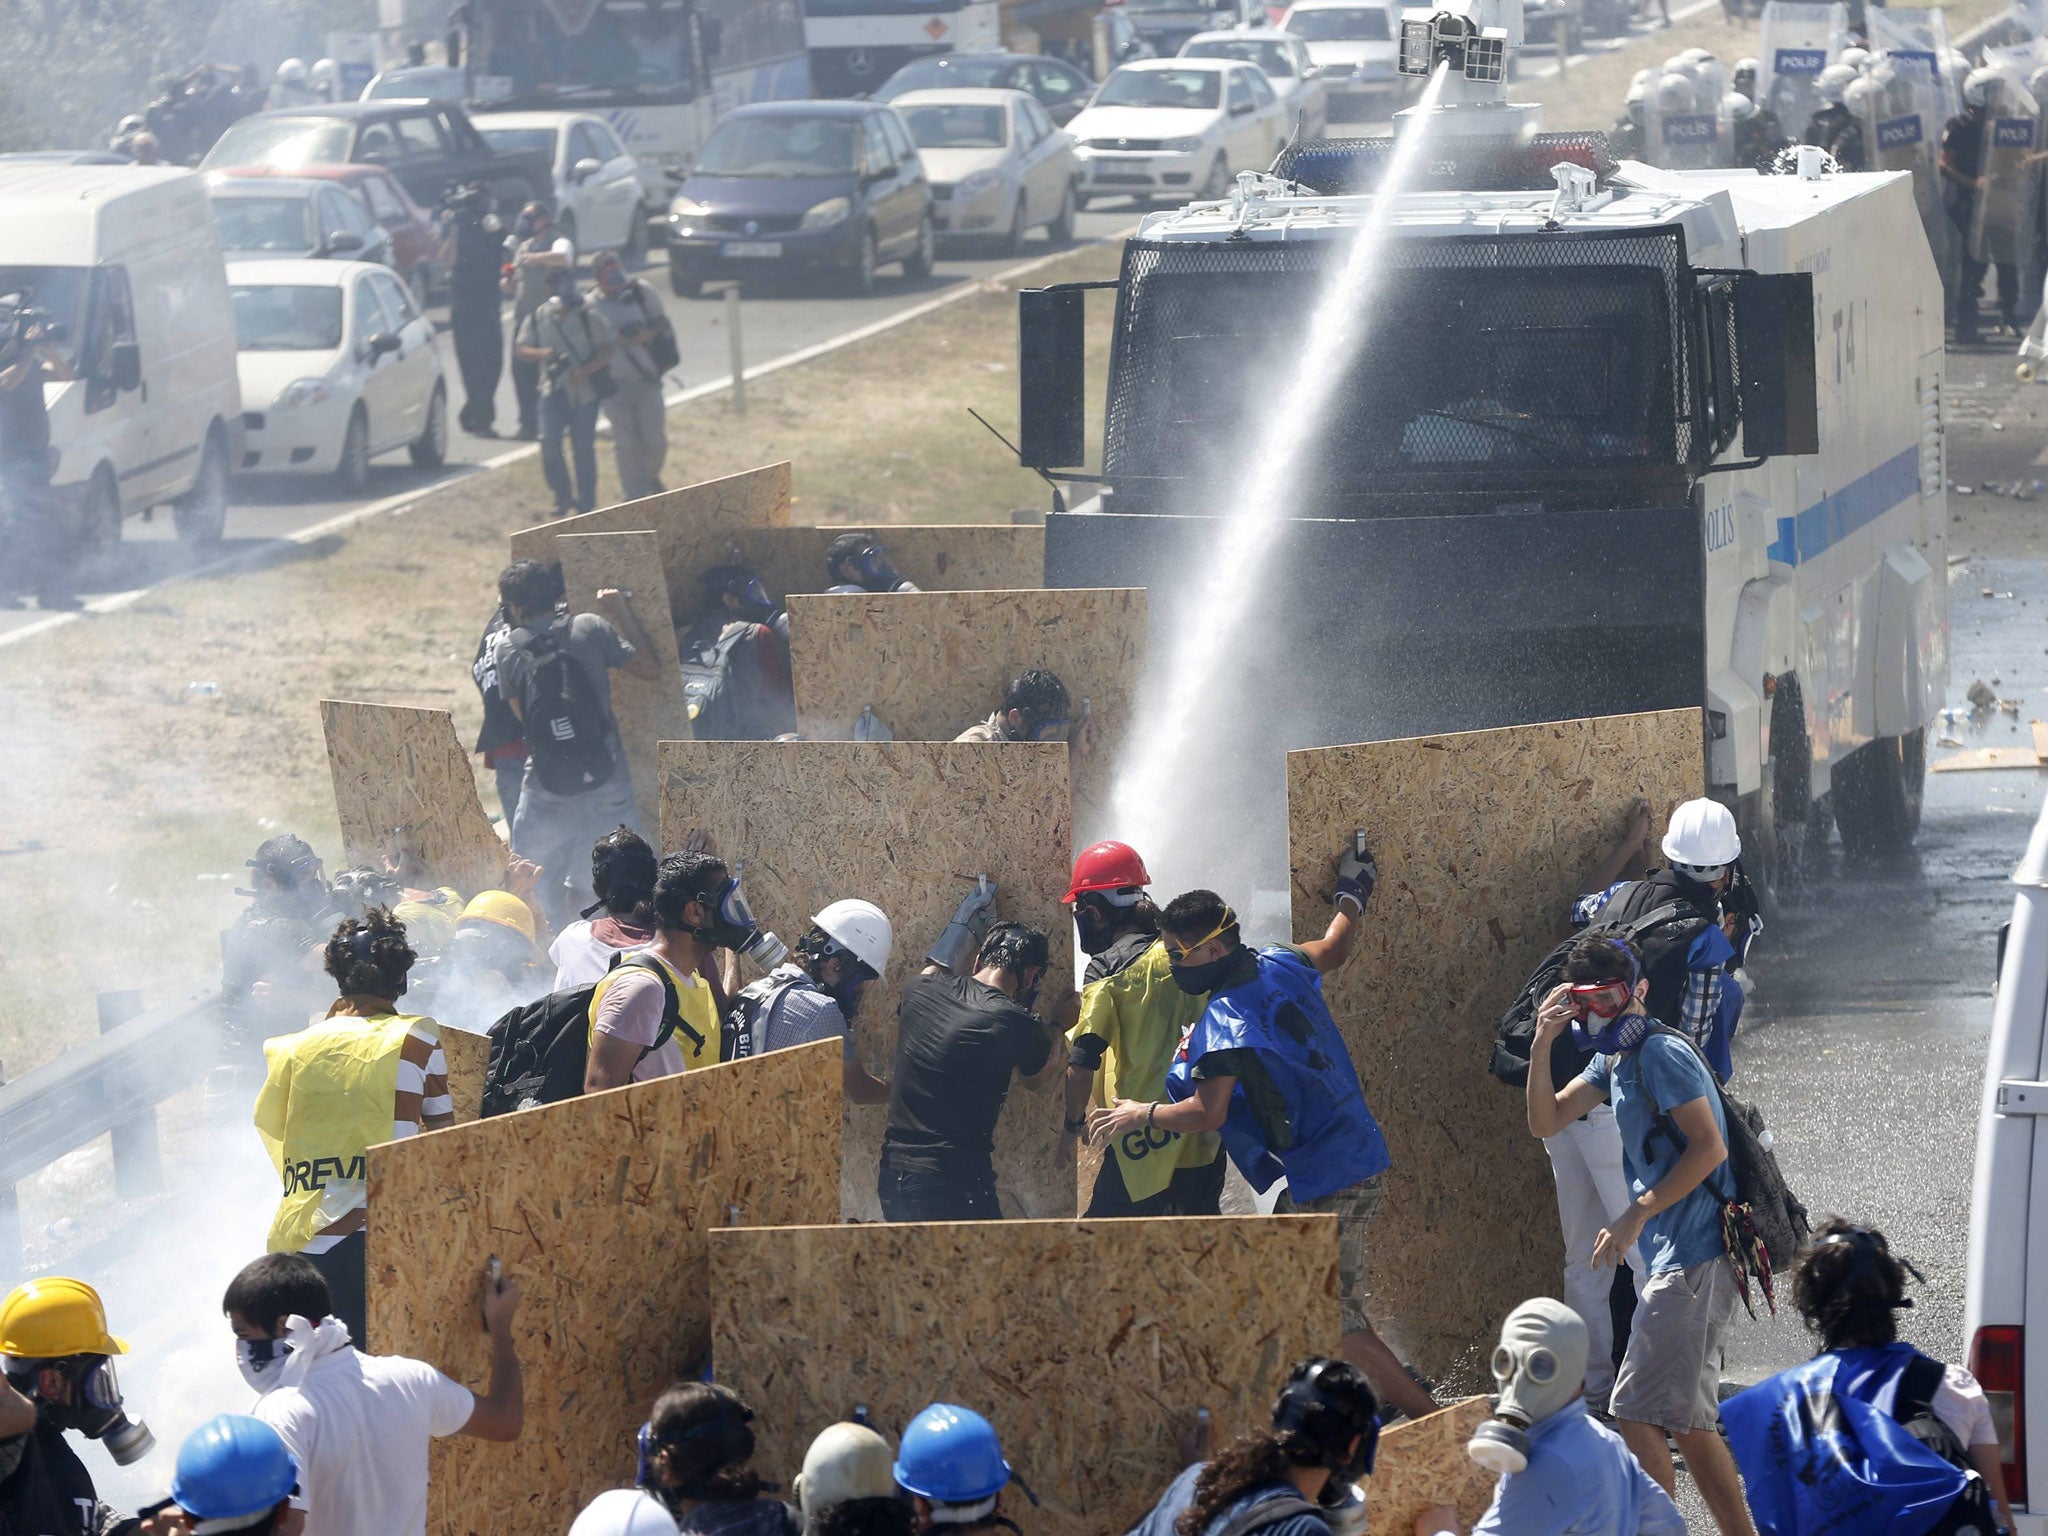 Riot police use water cannon and tear gas to disperse protesters as they try to march to a courthouse in Silivri